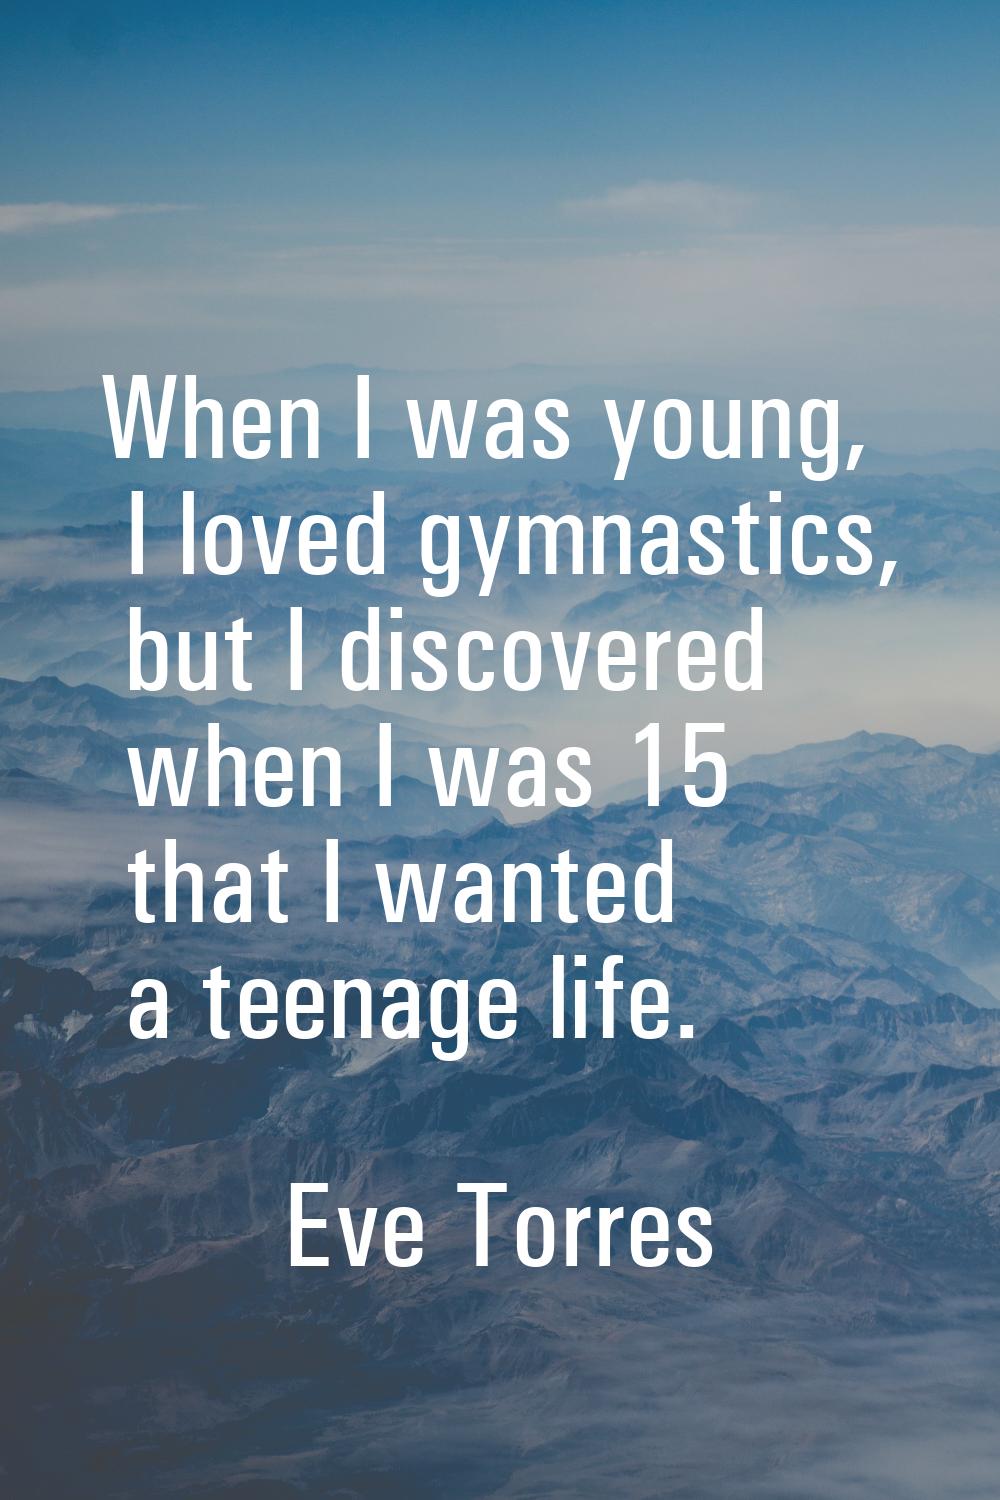 When I was young, I loved gymnastics, but I discovered when I was 15 that I wanted a teenage life.